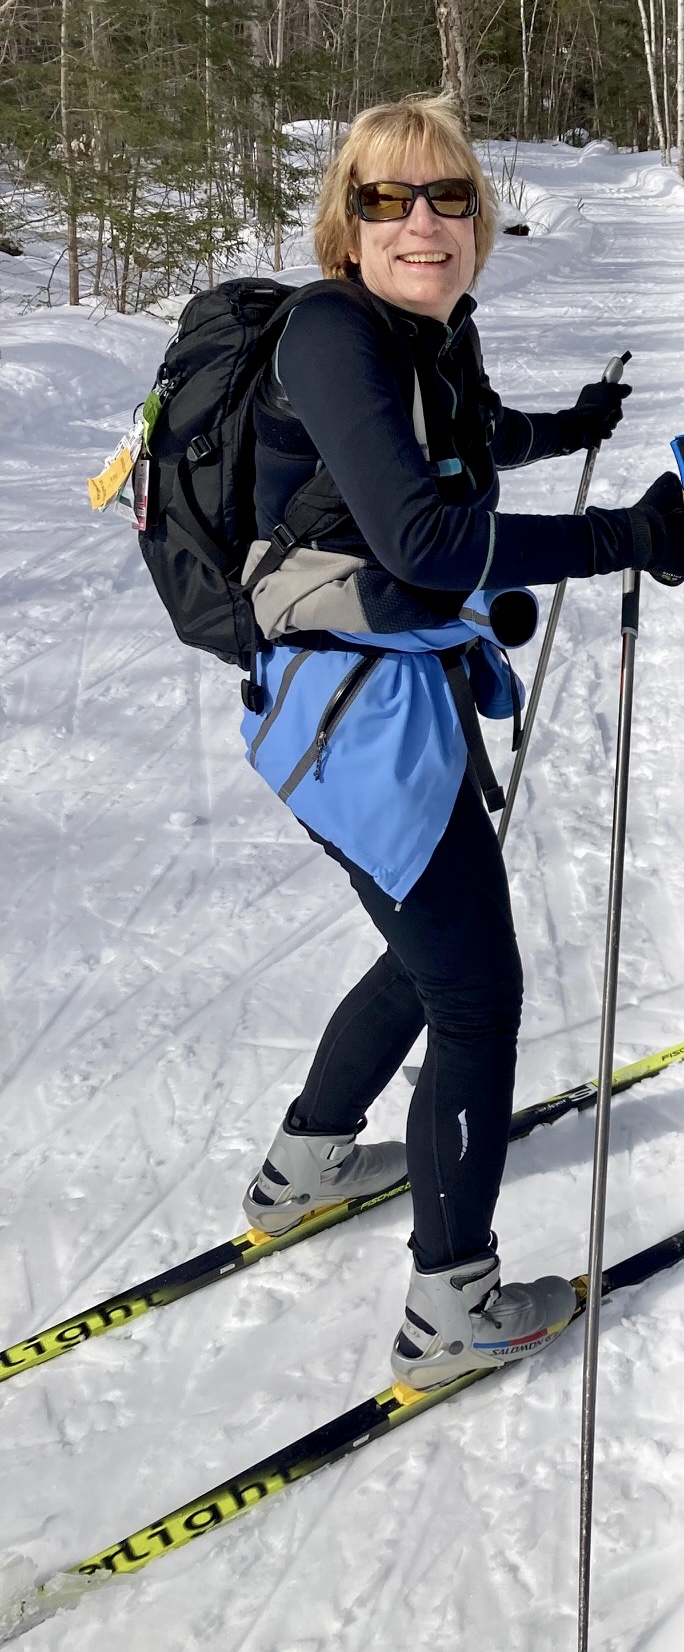 ALT TEXT PHOTO: Diane Manganaro, adorned in winter gear, a backpack, and skis radiates a warm smile while gracefully striking a pose with her ski poles in hand. Behind her, a picturesque winter wonderland unfolds, with snow-draped ground and a forest of trees setting a wintry backdrop.